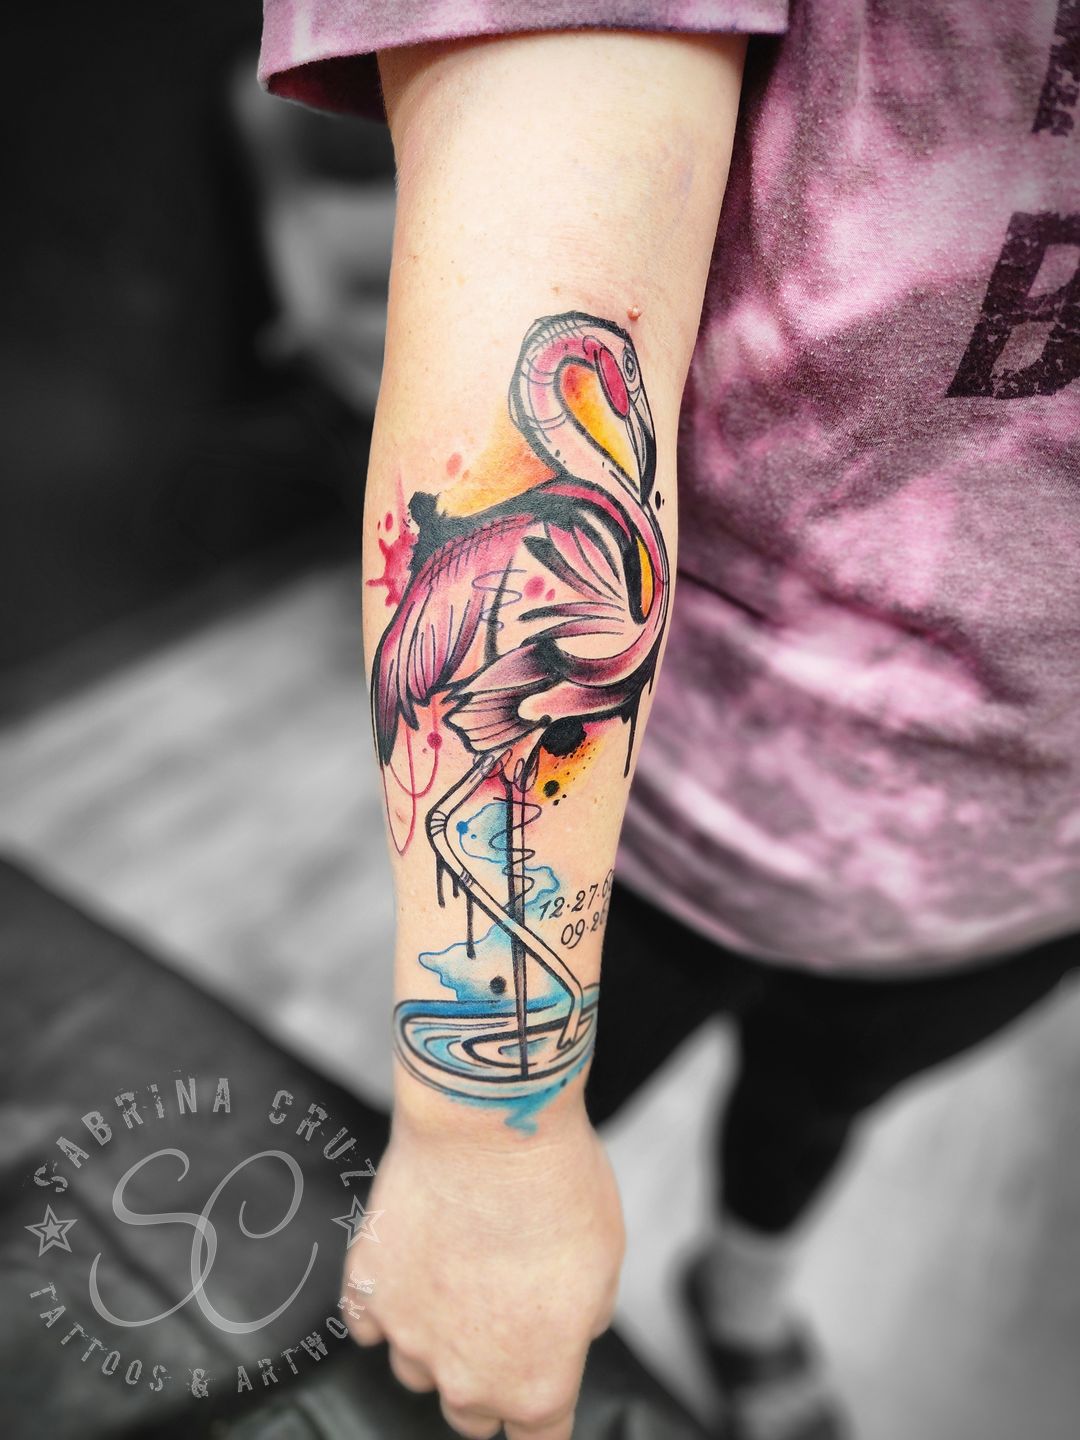 How to Heal a Watercolor Tattoo — Certified Tattoo Studios